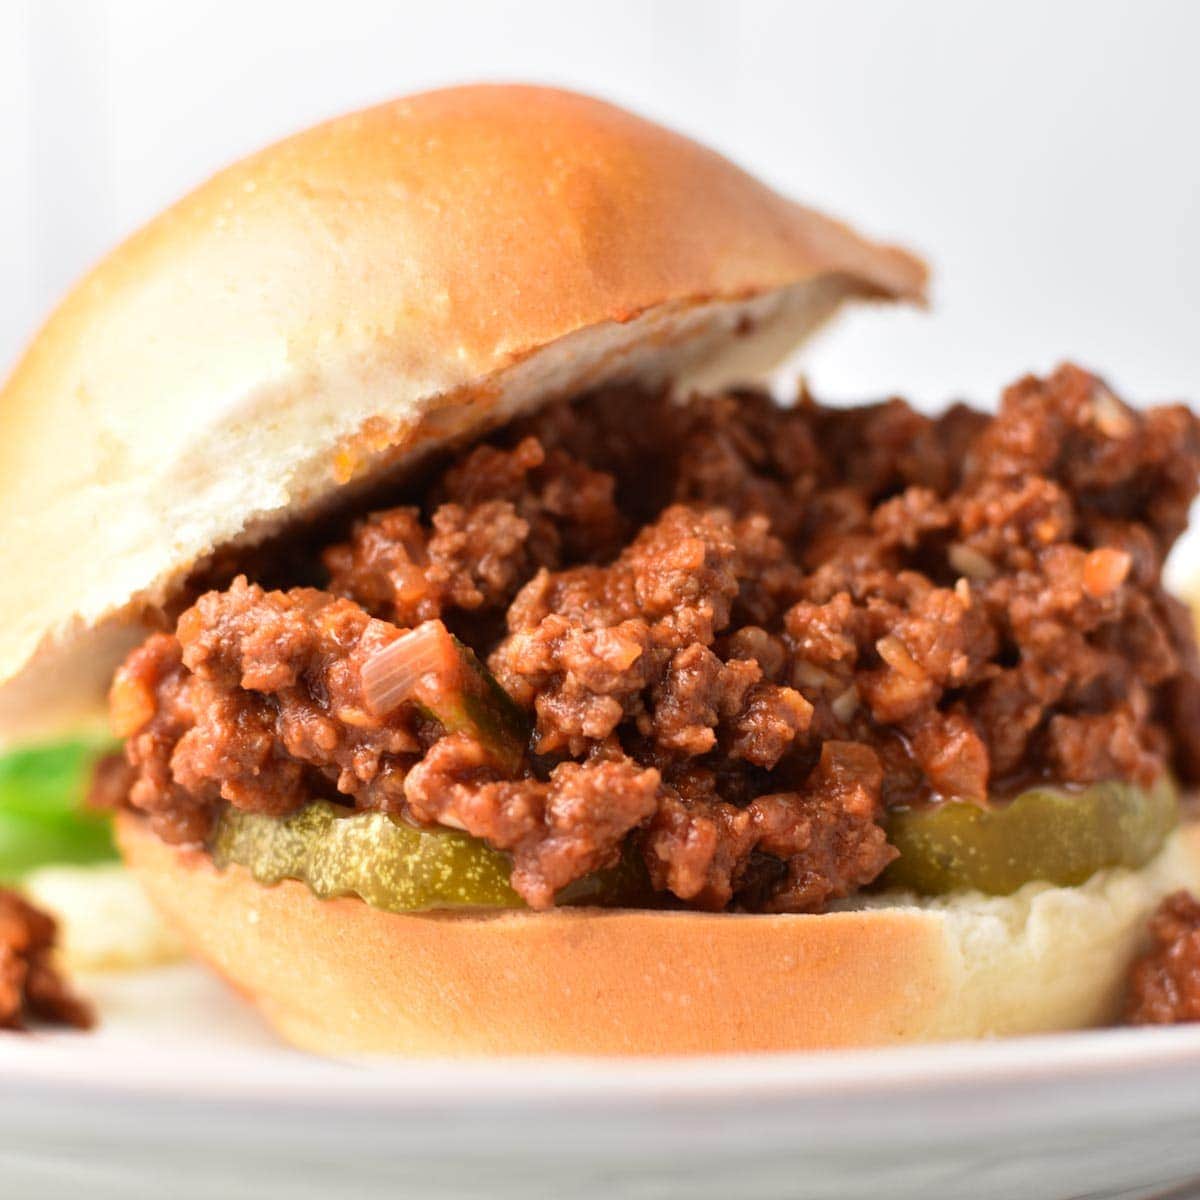 Sloppy joes without ketchup falling out of a bun on a white plate